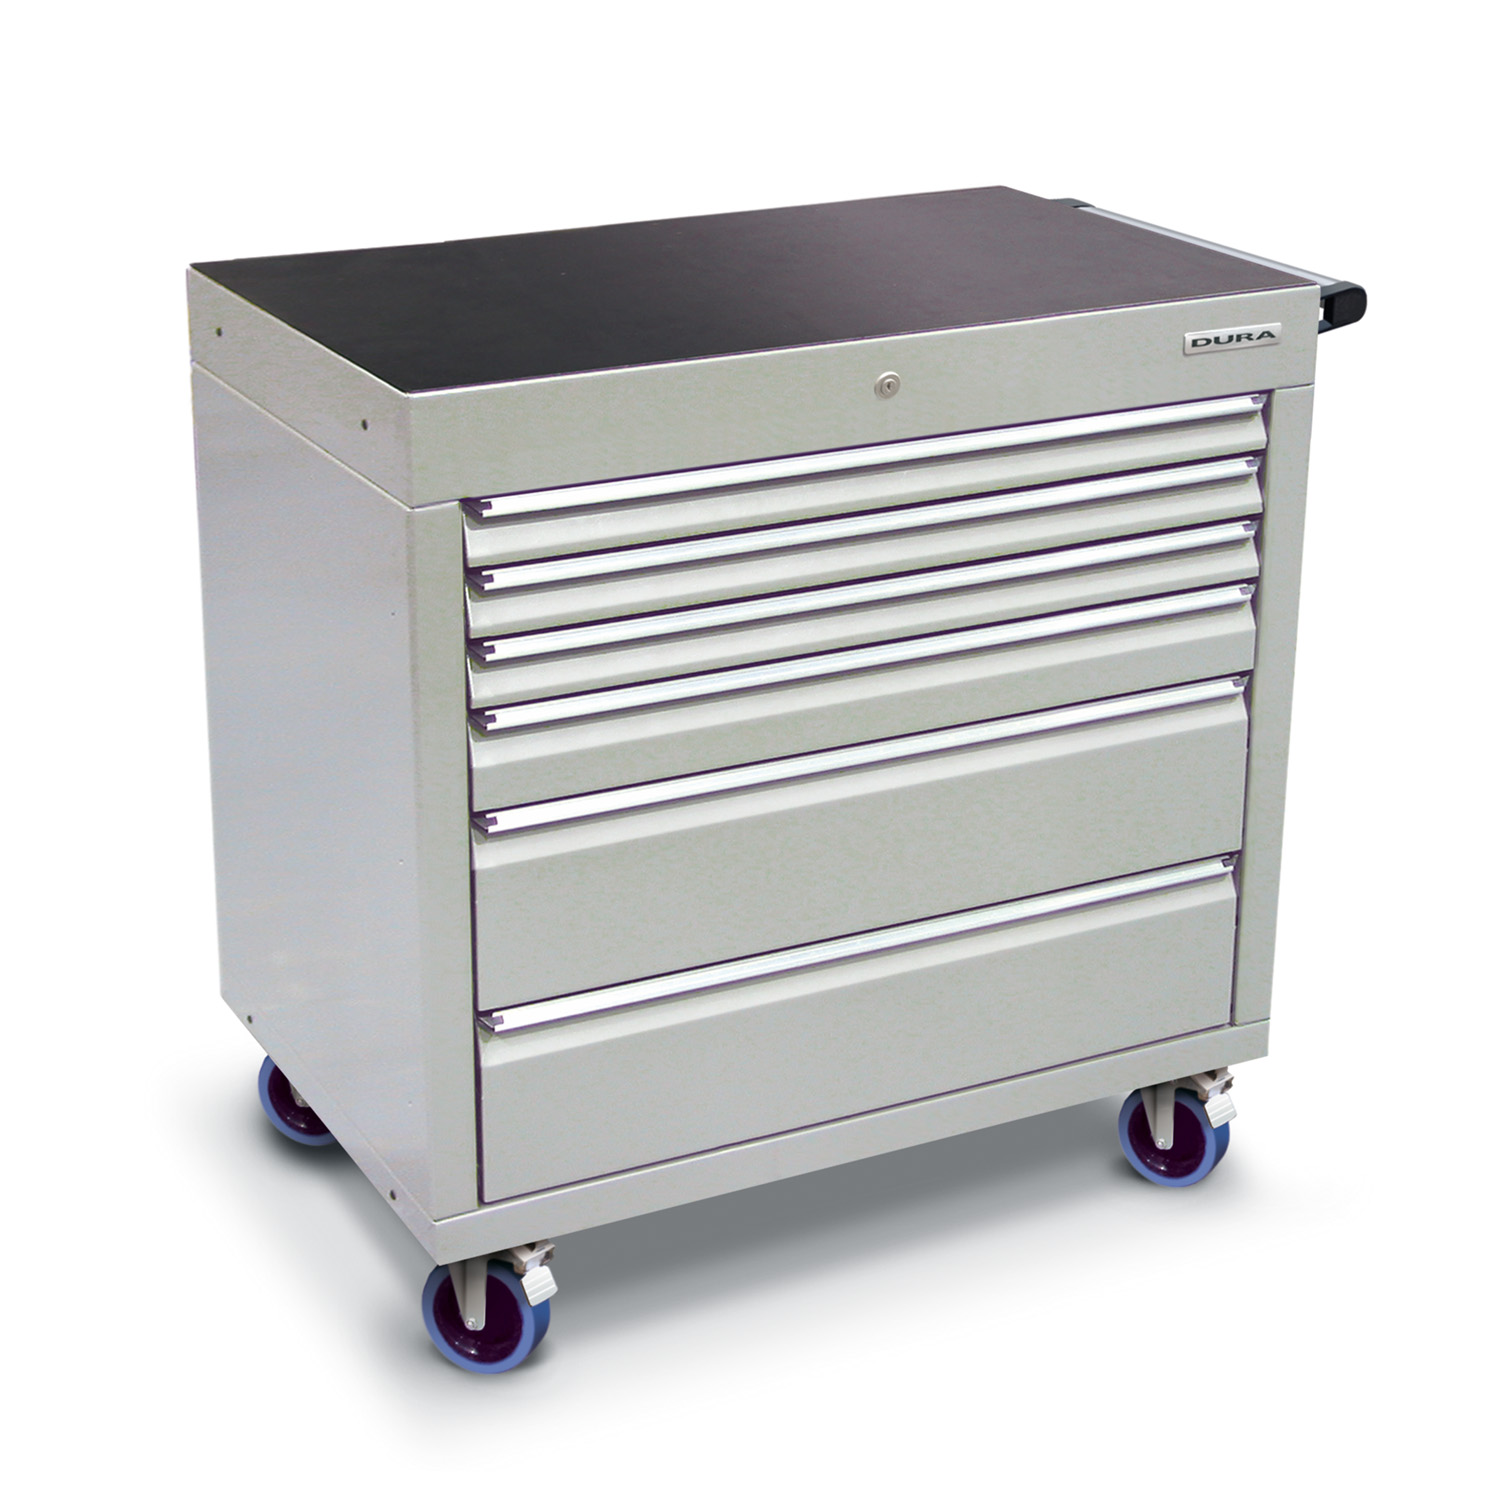 900 series cabinet with 6 drawers (3 slim, 1 medium, 2 large) and castors